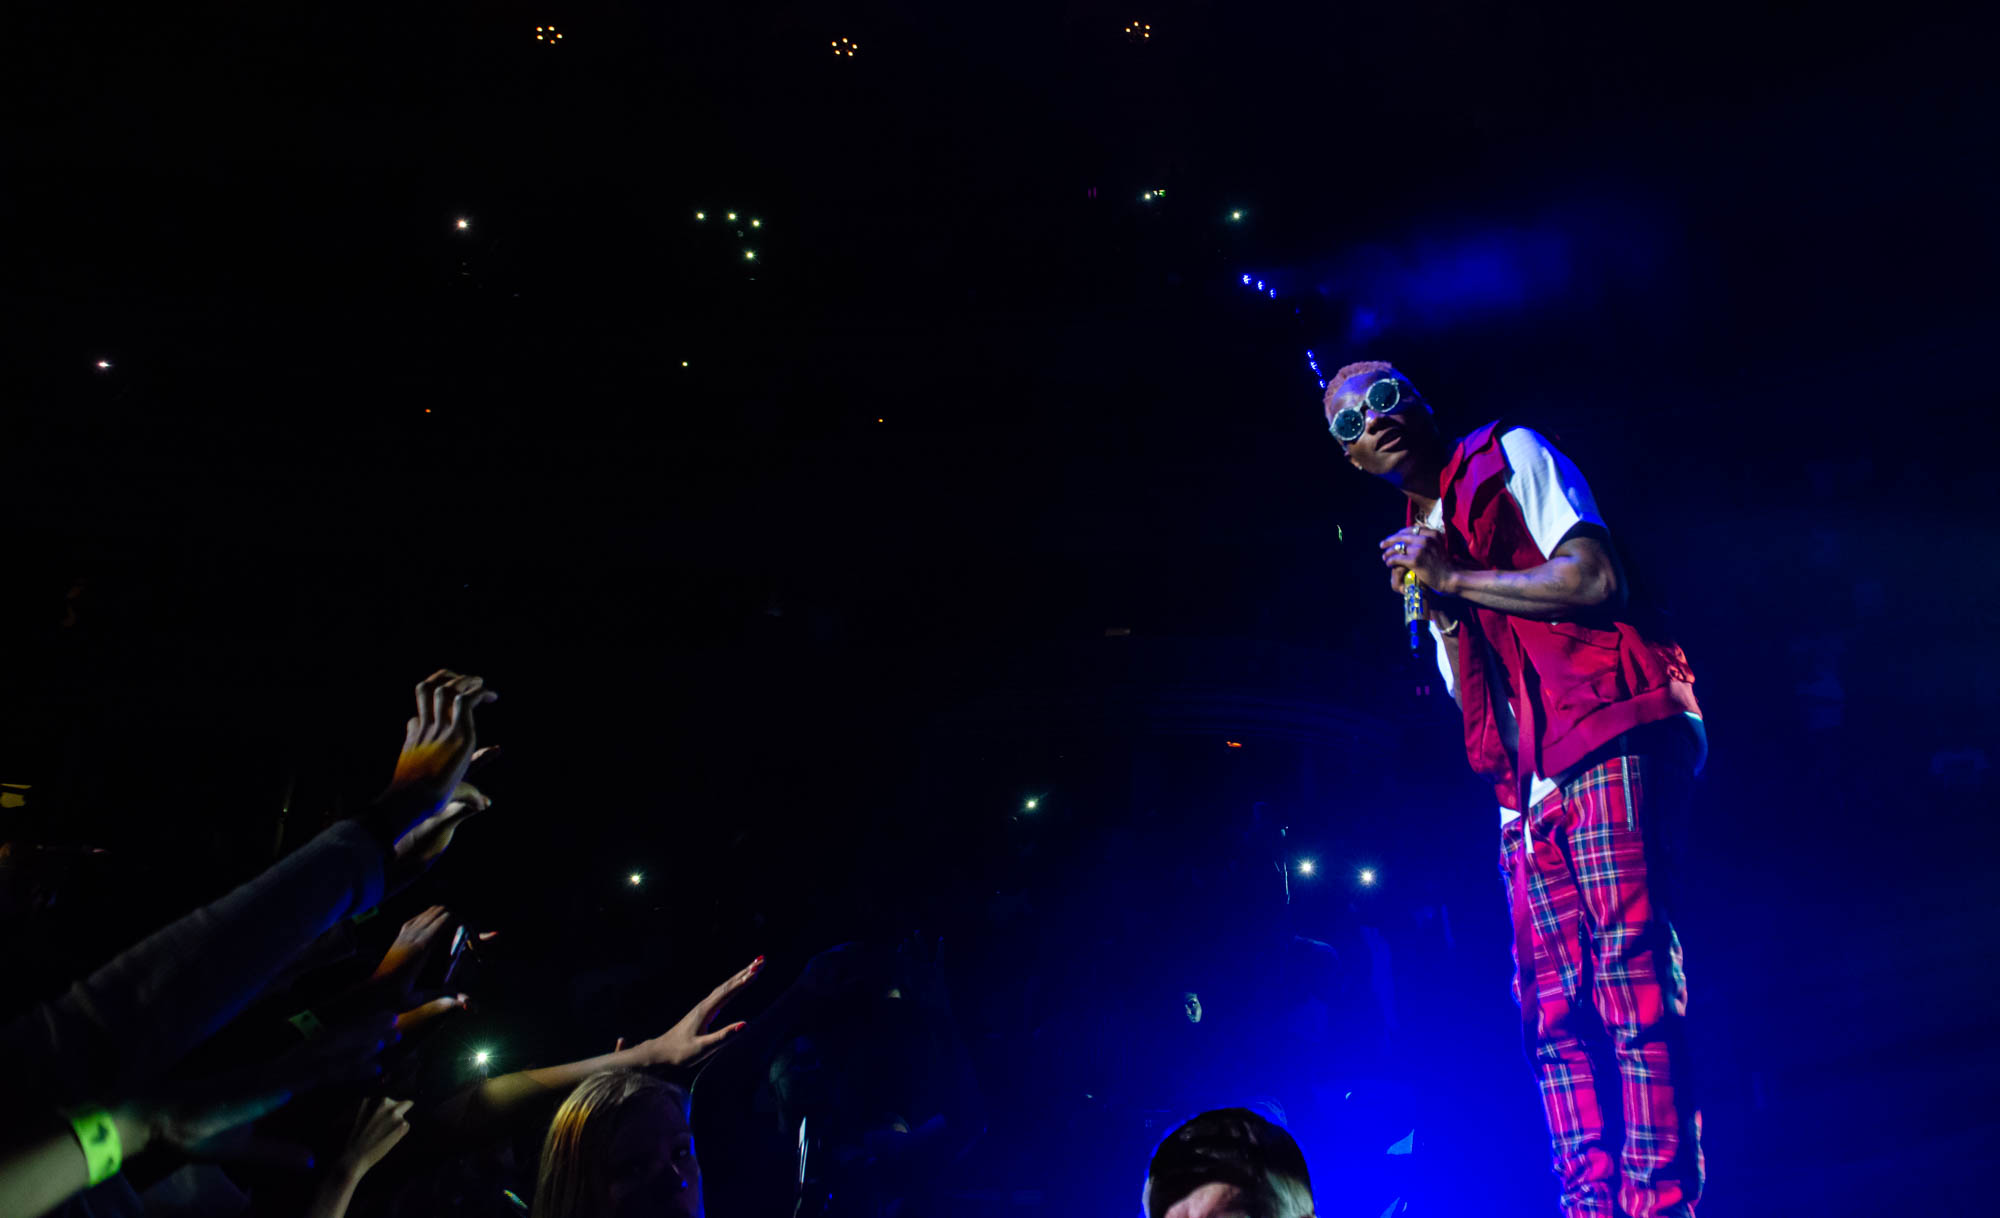 London, United Kingdom. 29th September 2017. WIZKID Performing Live At The Royal Albert Hall. Photographed Michael Tubes.